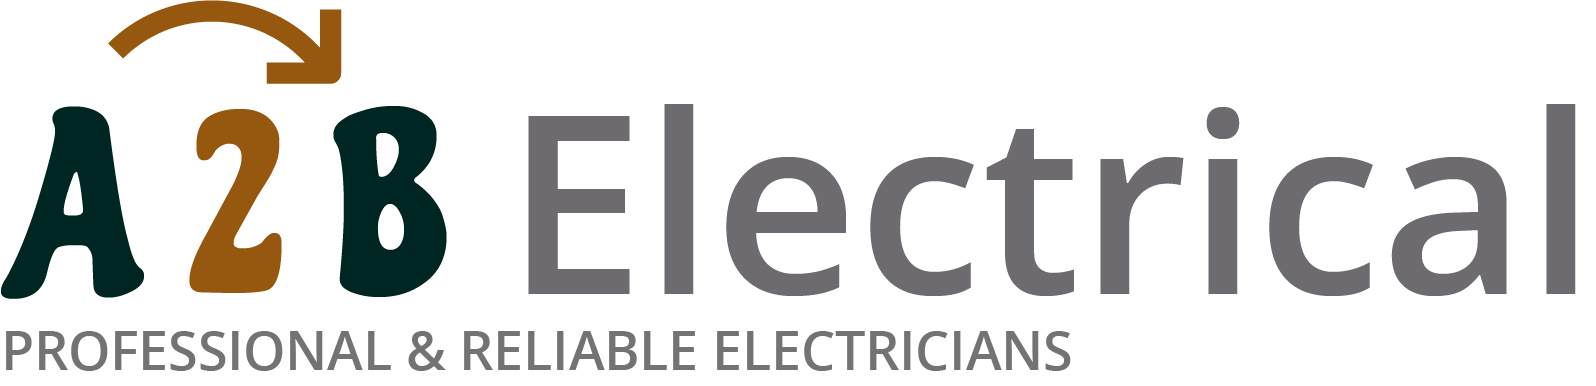 If you have electrical wiring problems in Twickenham, we can provide an electrician to have a look for you. 